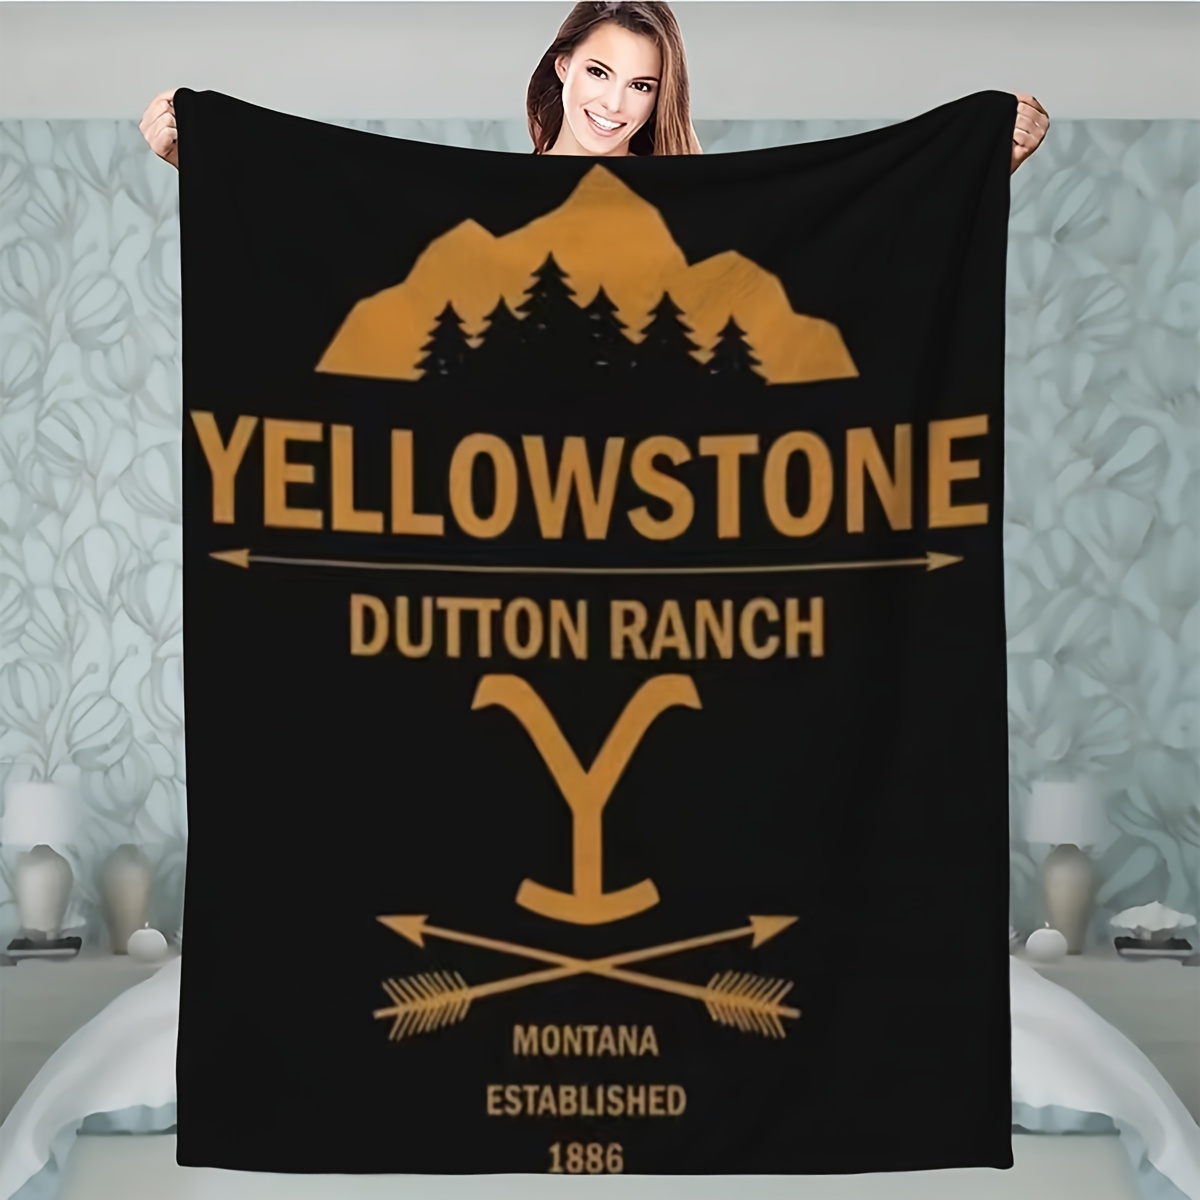 

1pc Yellowstone Montana Established 1886 Design Flannel Throw Blanket - Contemporary Style, All-season Multipurpose Soft And Warm Lightweight Knitted Bedding, Digital Print Stain Resistant Polyester